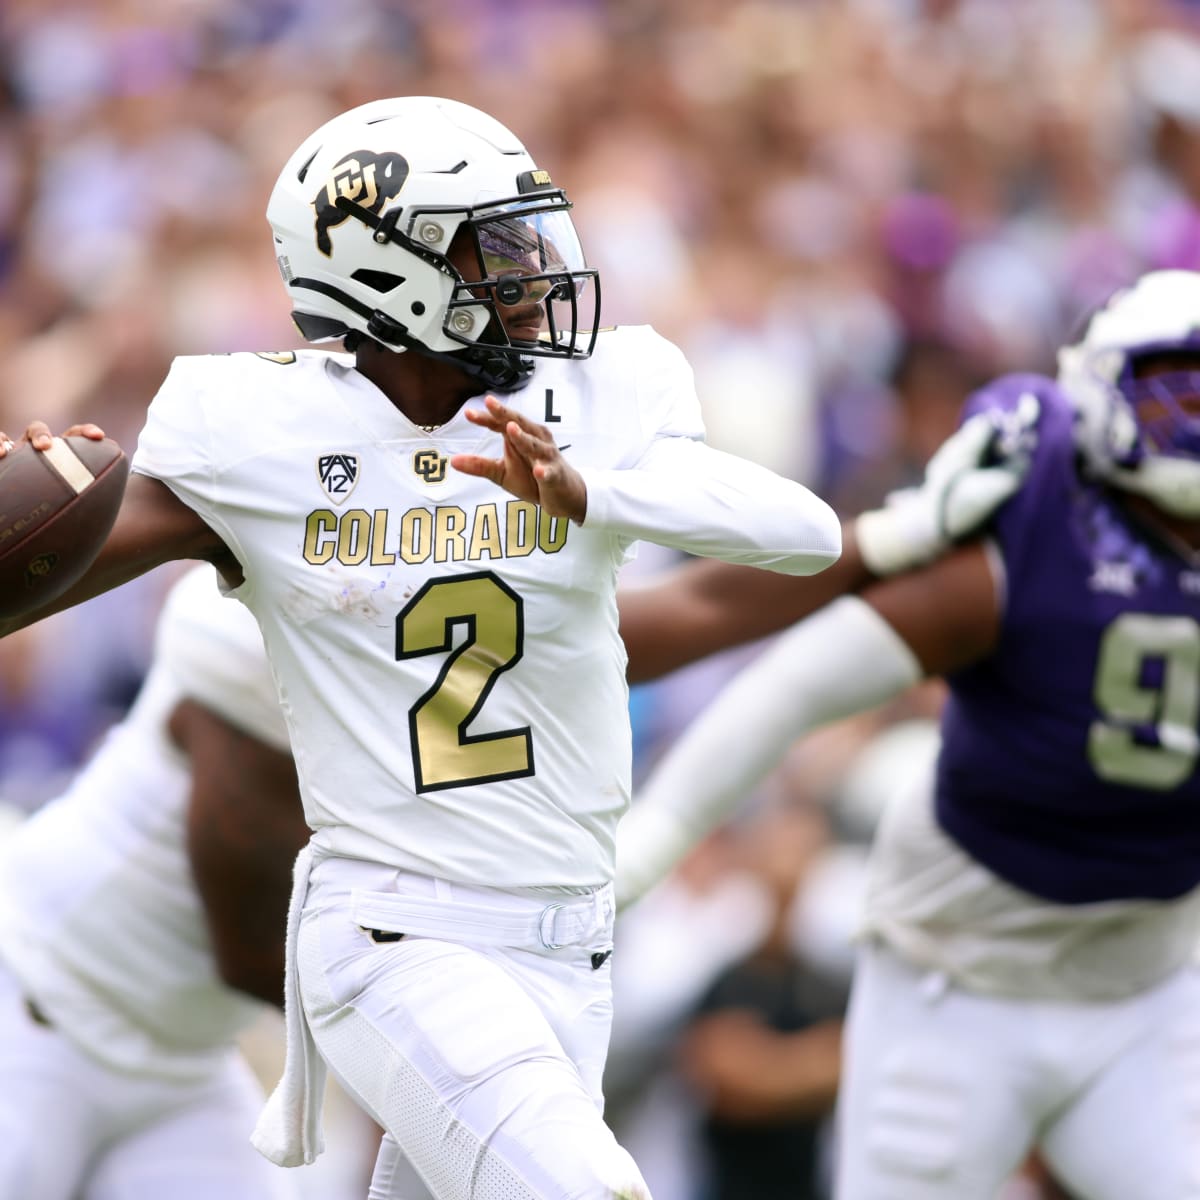 Colorado's Deion Sanders 'Truly Disturbed' by Loss to Stanford